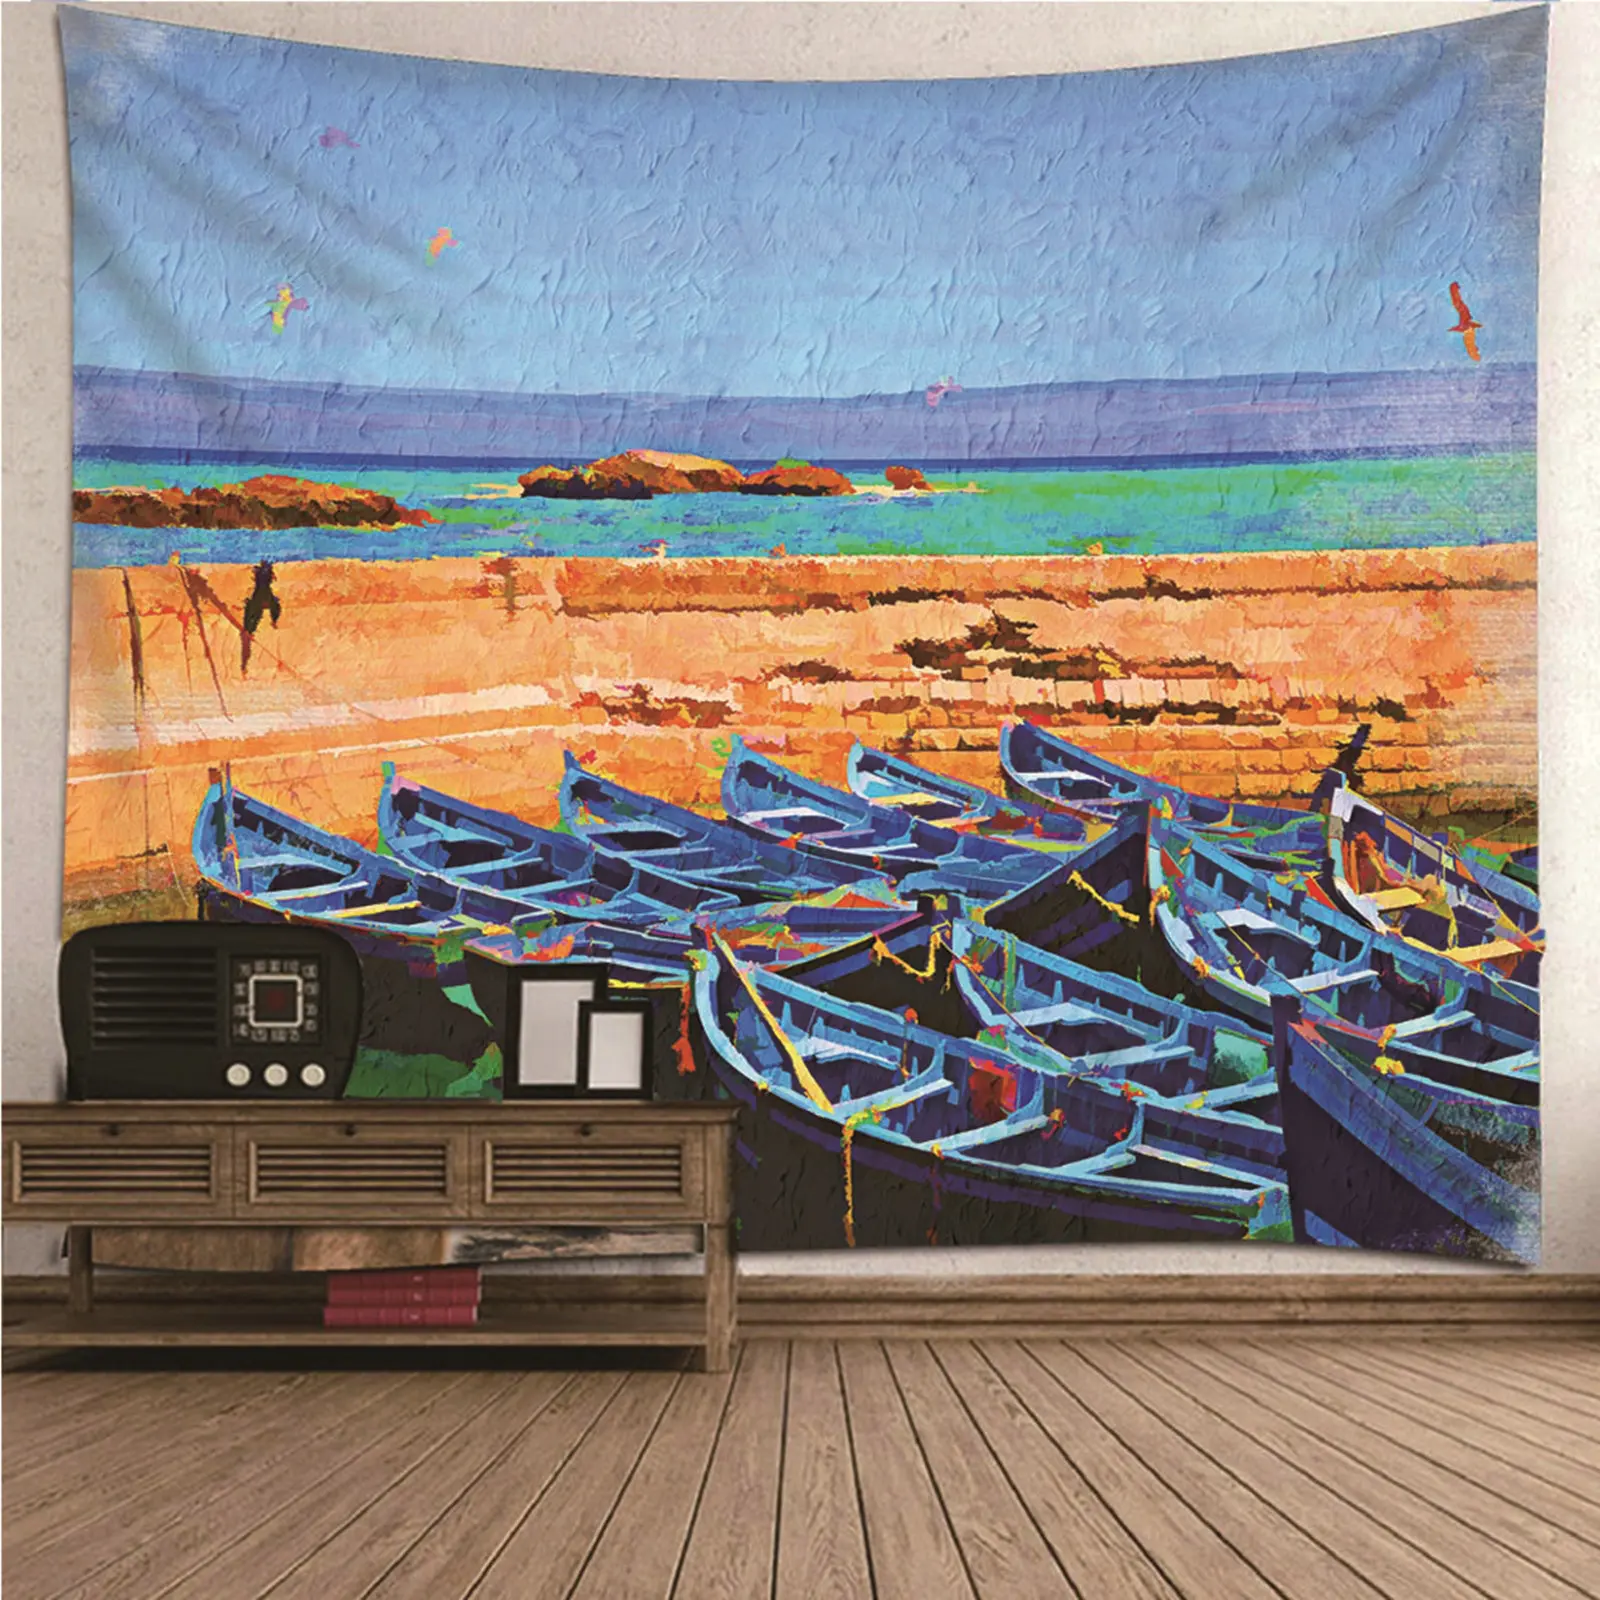 

Dorm Tapestry Home Decor Accents Living Room Seaside & Boats Wall Hanging Blanket Dorm Art Decor Covering